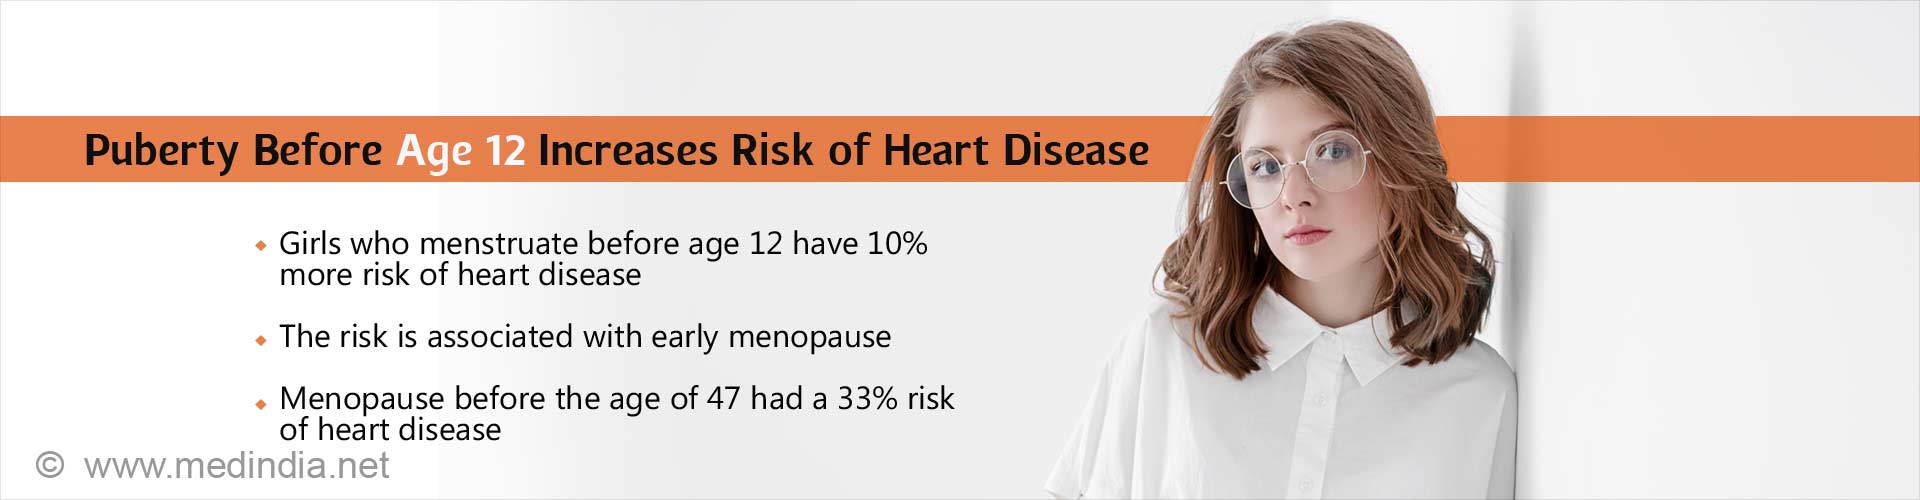 Puberty before age 12 increases risk of heart disease
- girls who menstruate before age 12 have 10% more risk of heart disease
- the risk is associated with early menopause
- menopause before the age of 47 had a 33% risk of heart disease